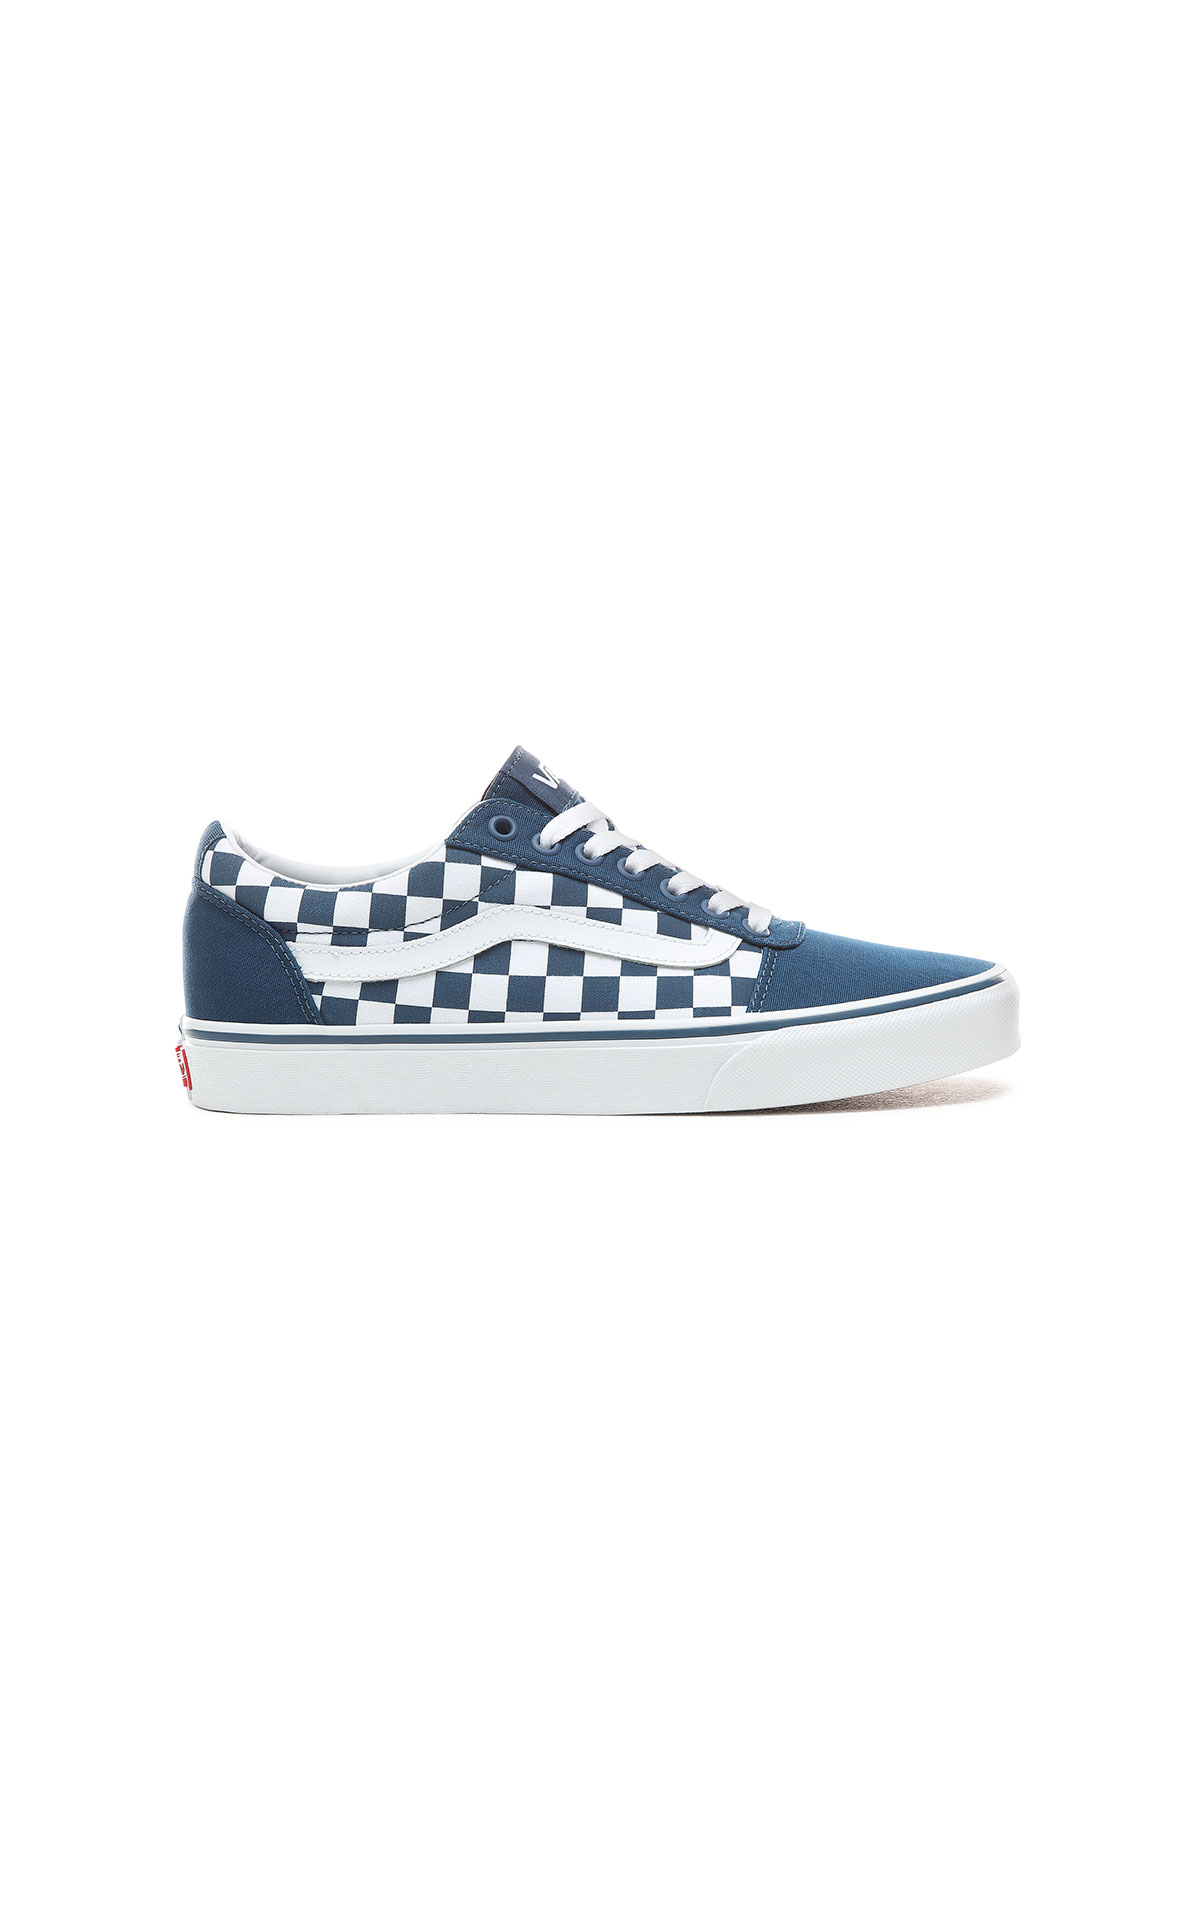 Blue checkered vans shoes